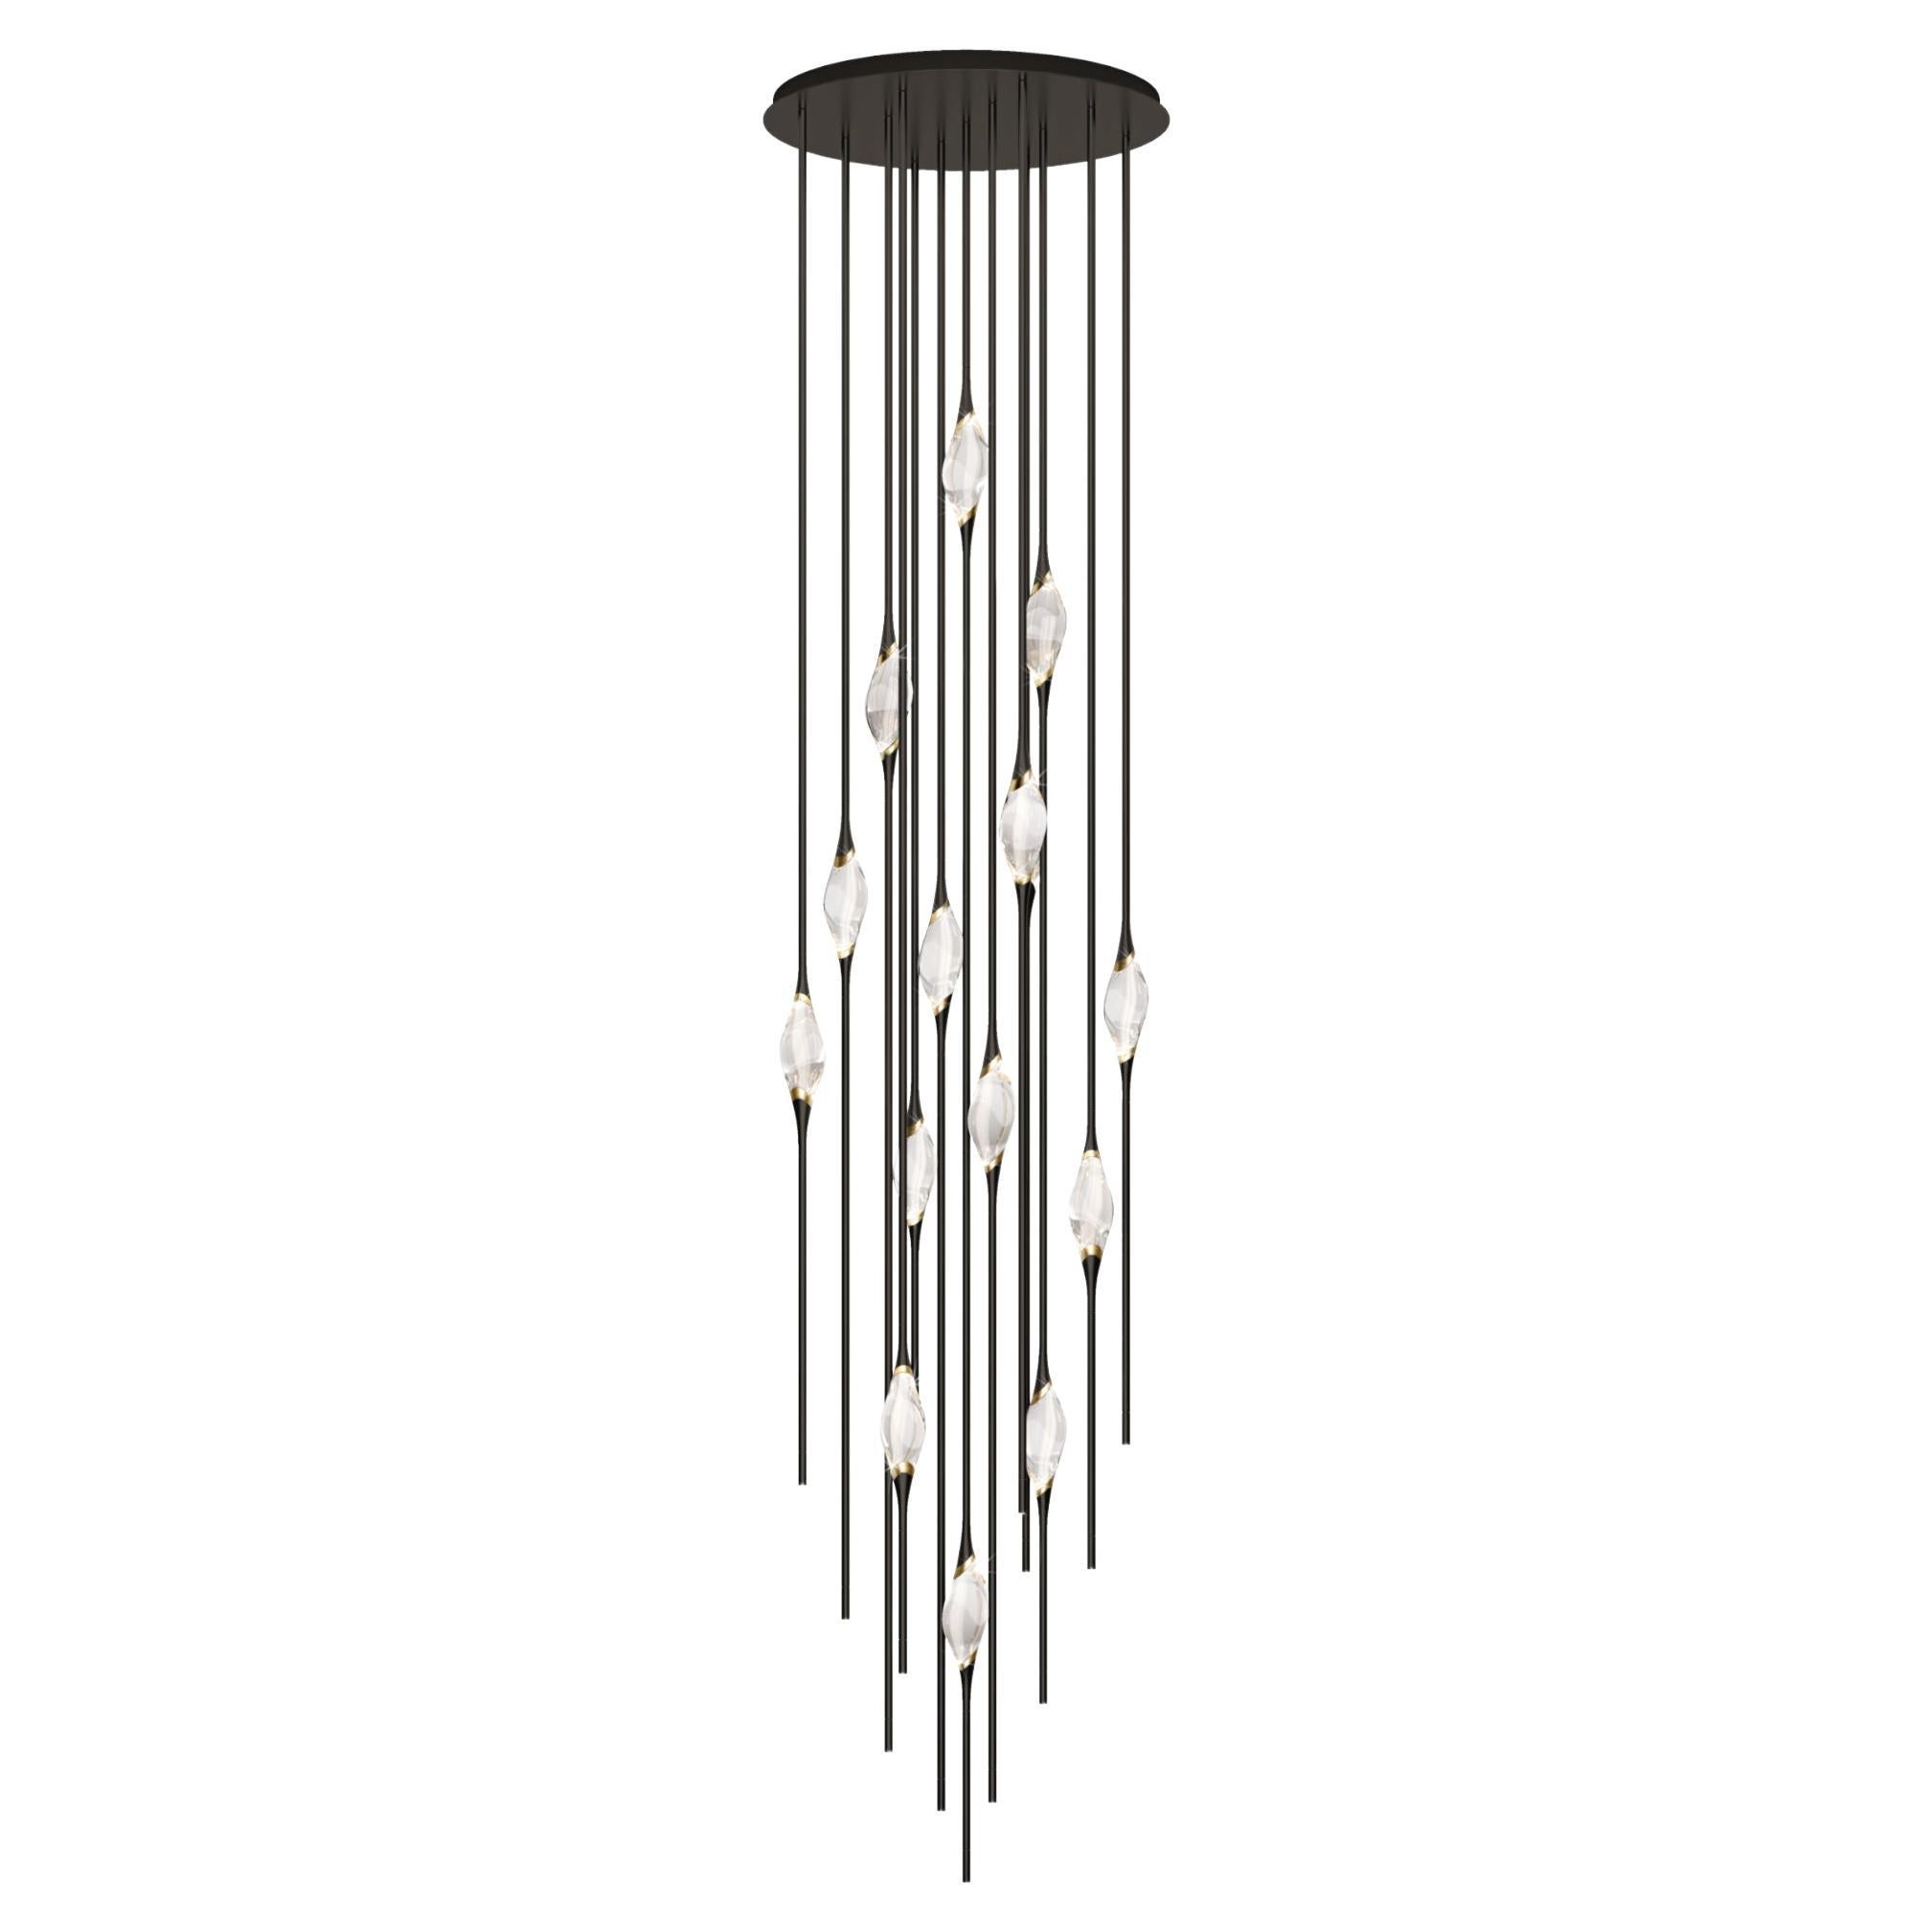 "Il Pezzo 12 Cluster Chandelier" - height 350cm/137" - black and polished brass